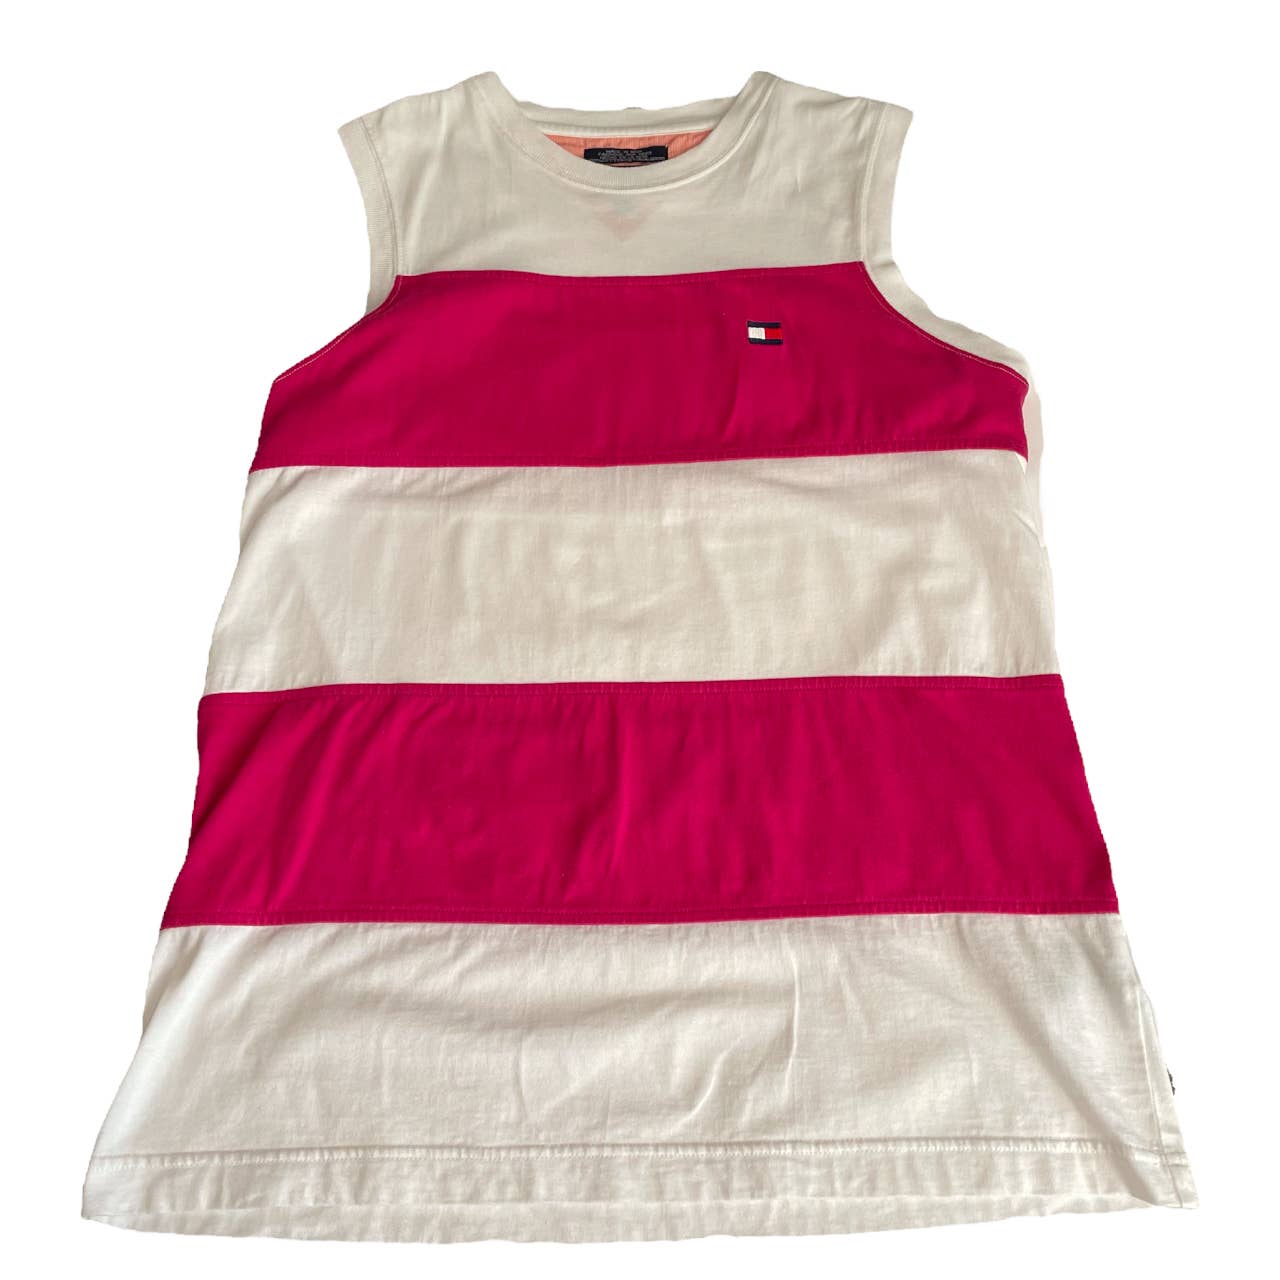 y2k Tommy Hilfiger white and magenta pink color block tank top / XS S M